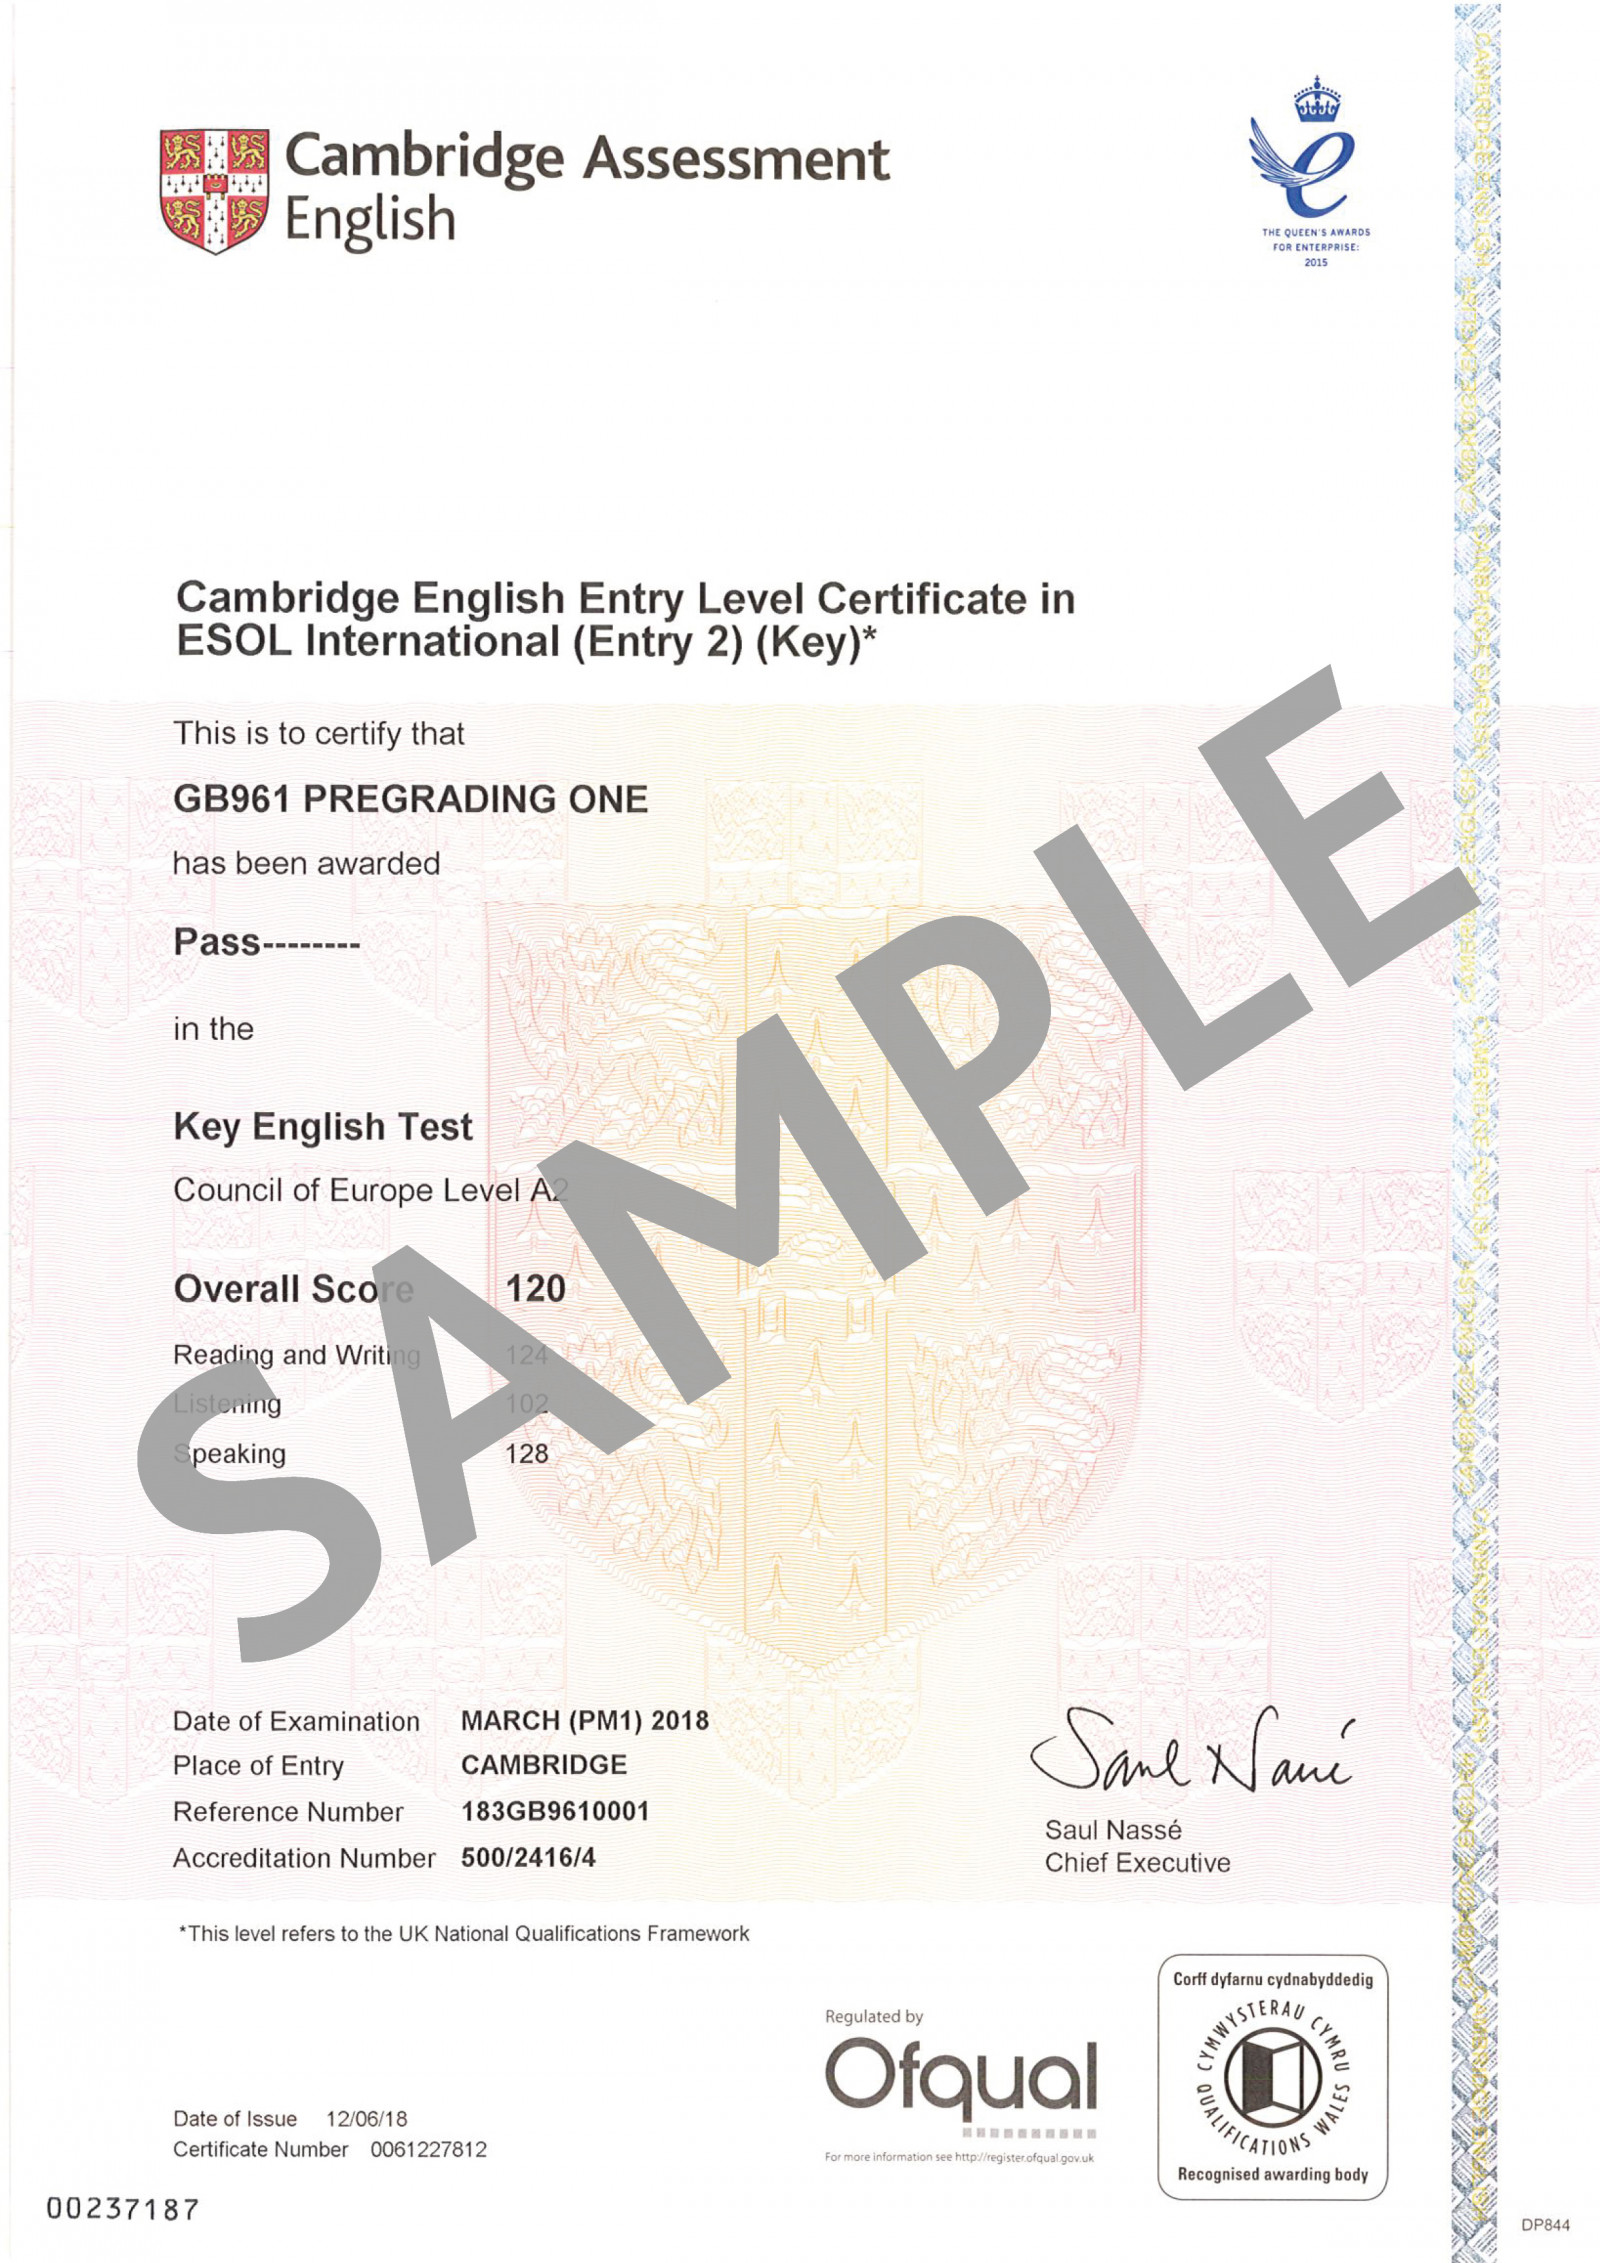 Cambridge Assessment English A2 Key Entry Level certificate